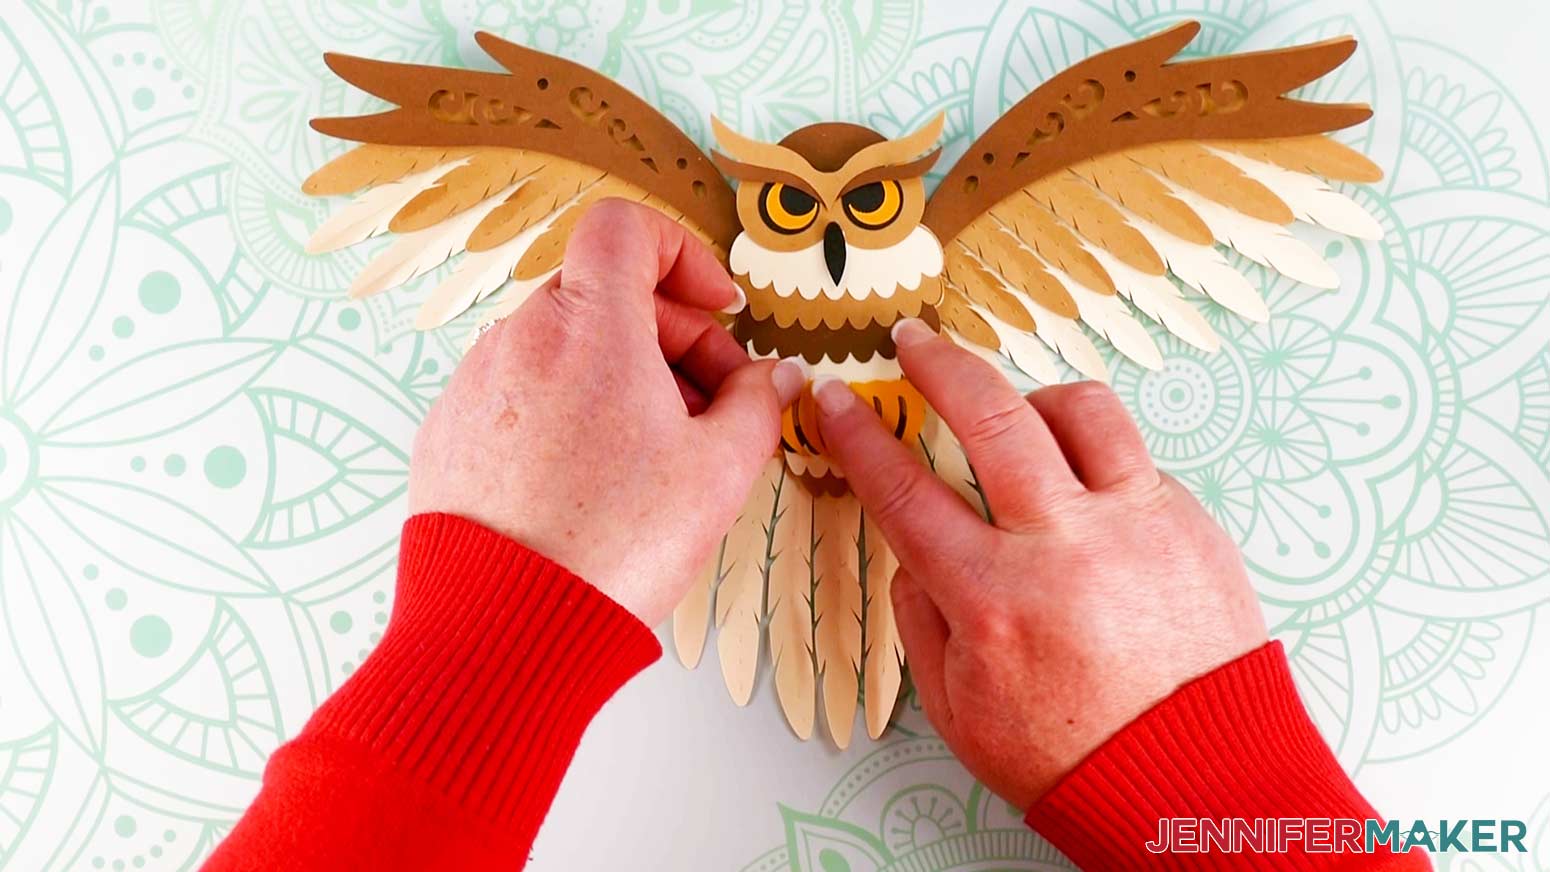 An overhead photo showing two hands pressing the small talon pieces onto the assembled layered owl on the work surface